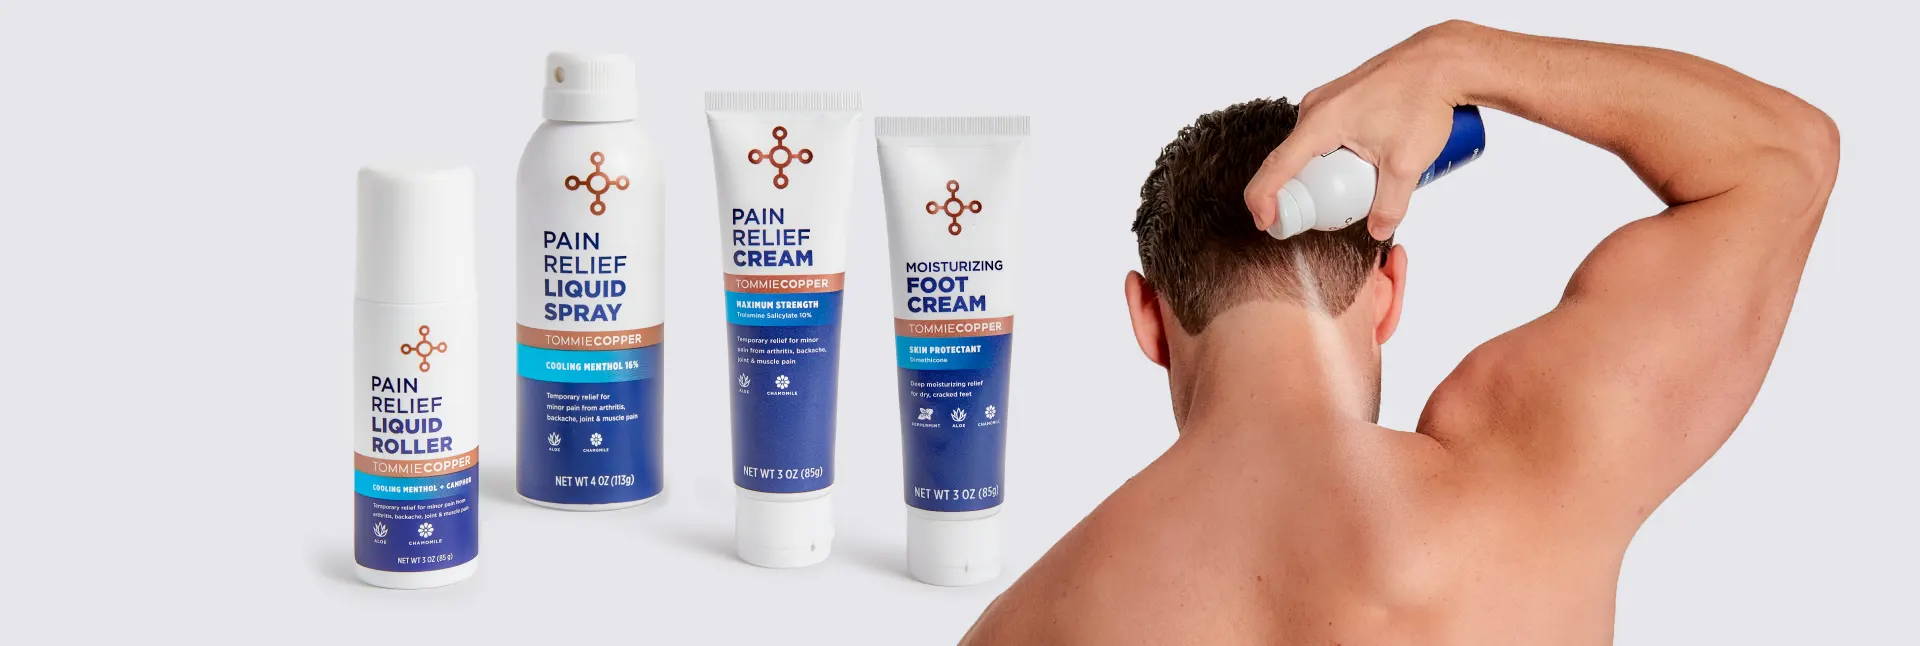 Assorted Tommie Copper® Pain Relief products beside a man applying Pain Relief Liquid Spray to his upper back